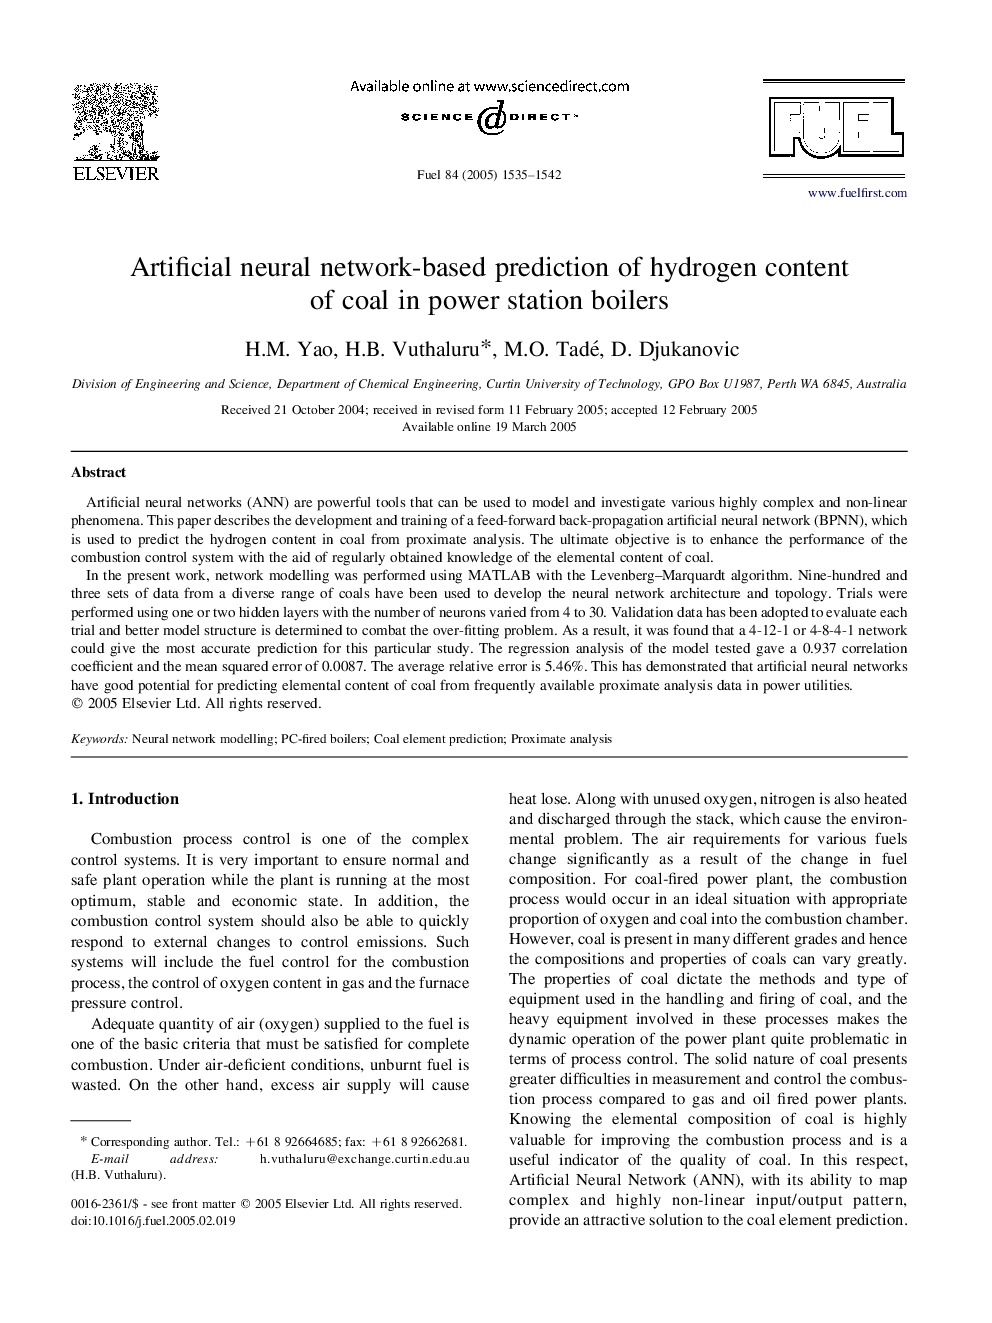 Artificial neural network-based prediction of hydrogen content of coal in power station boilers